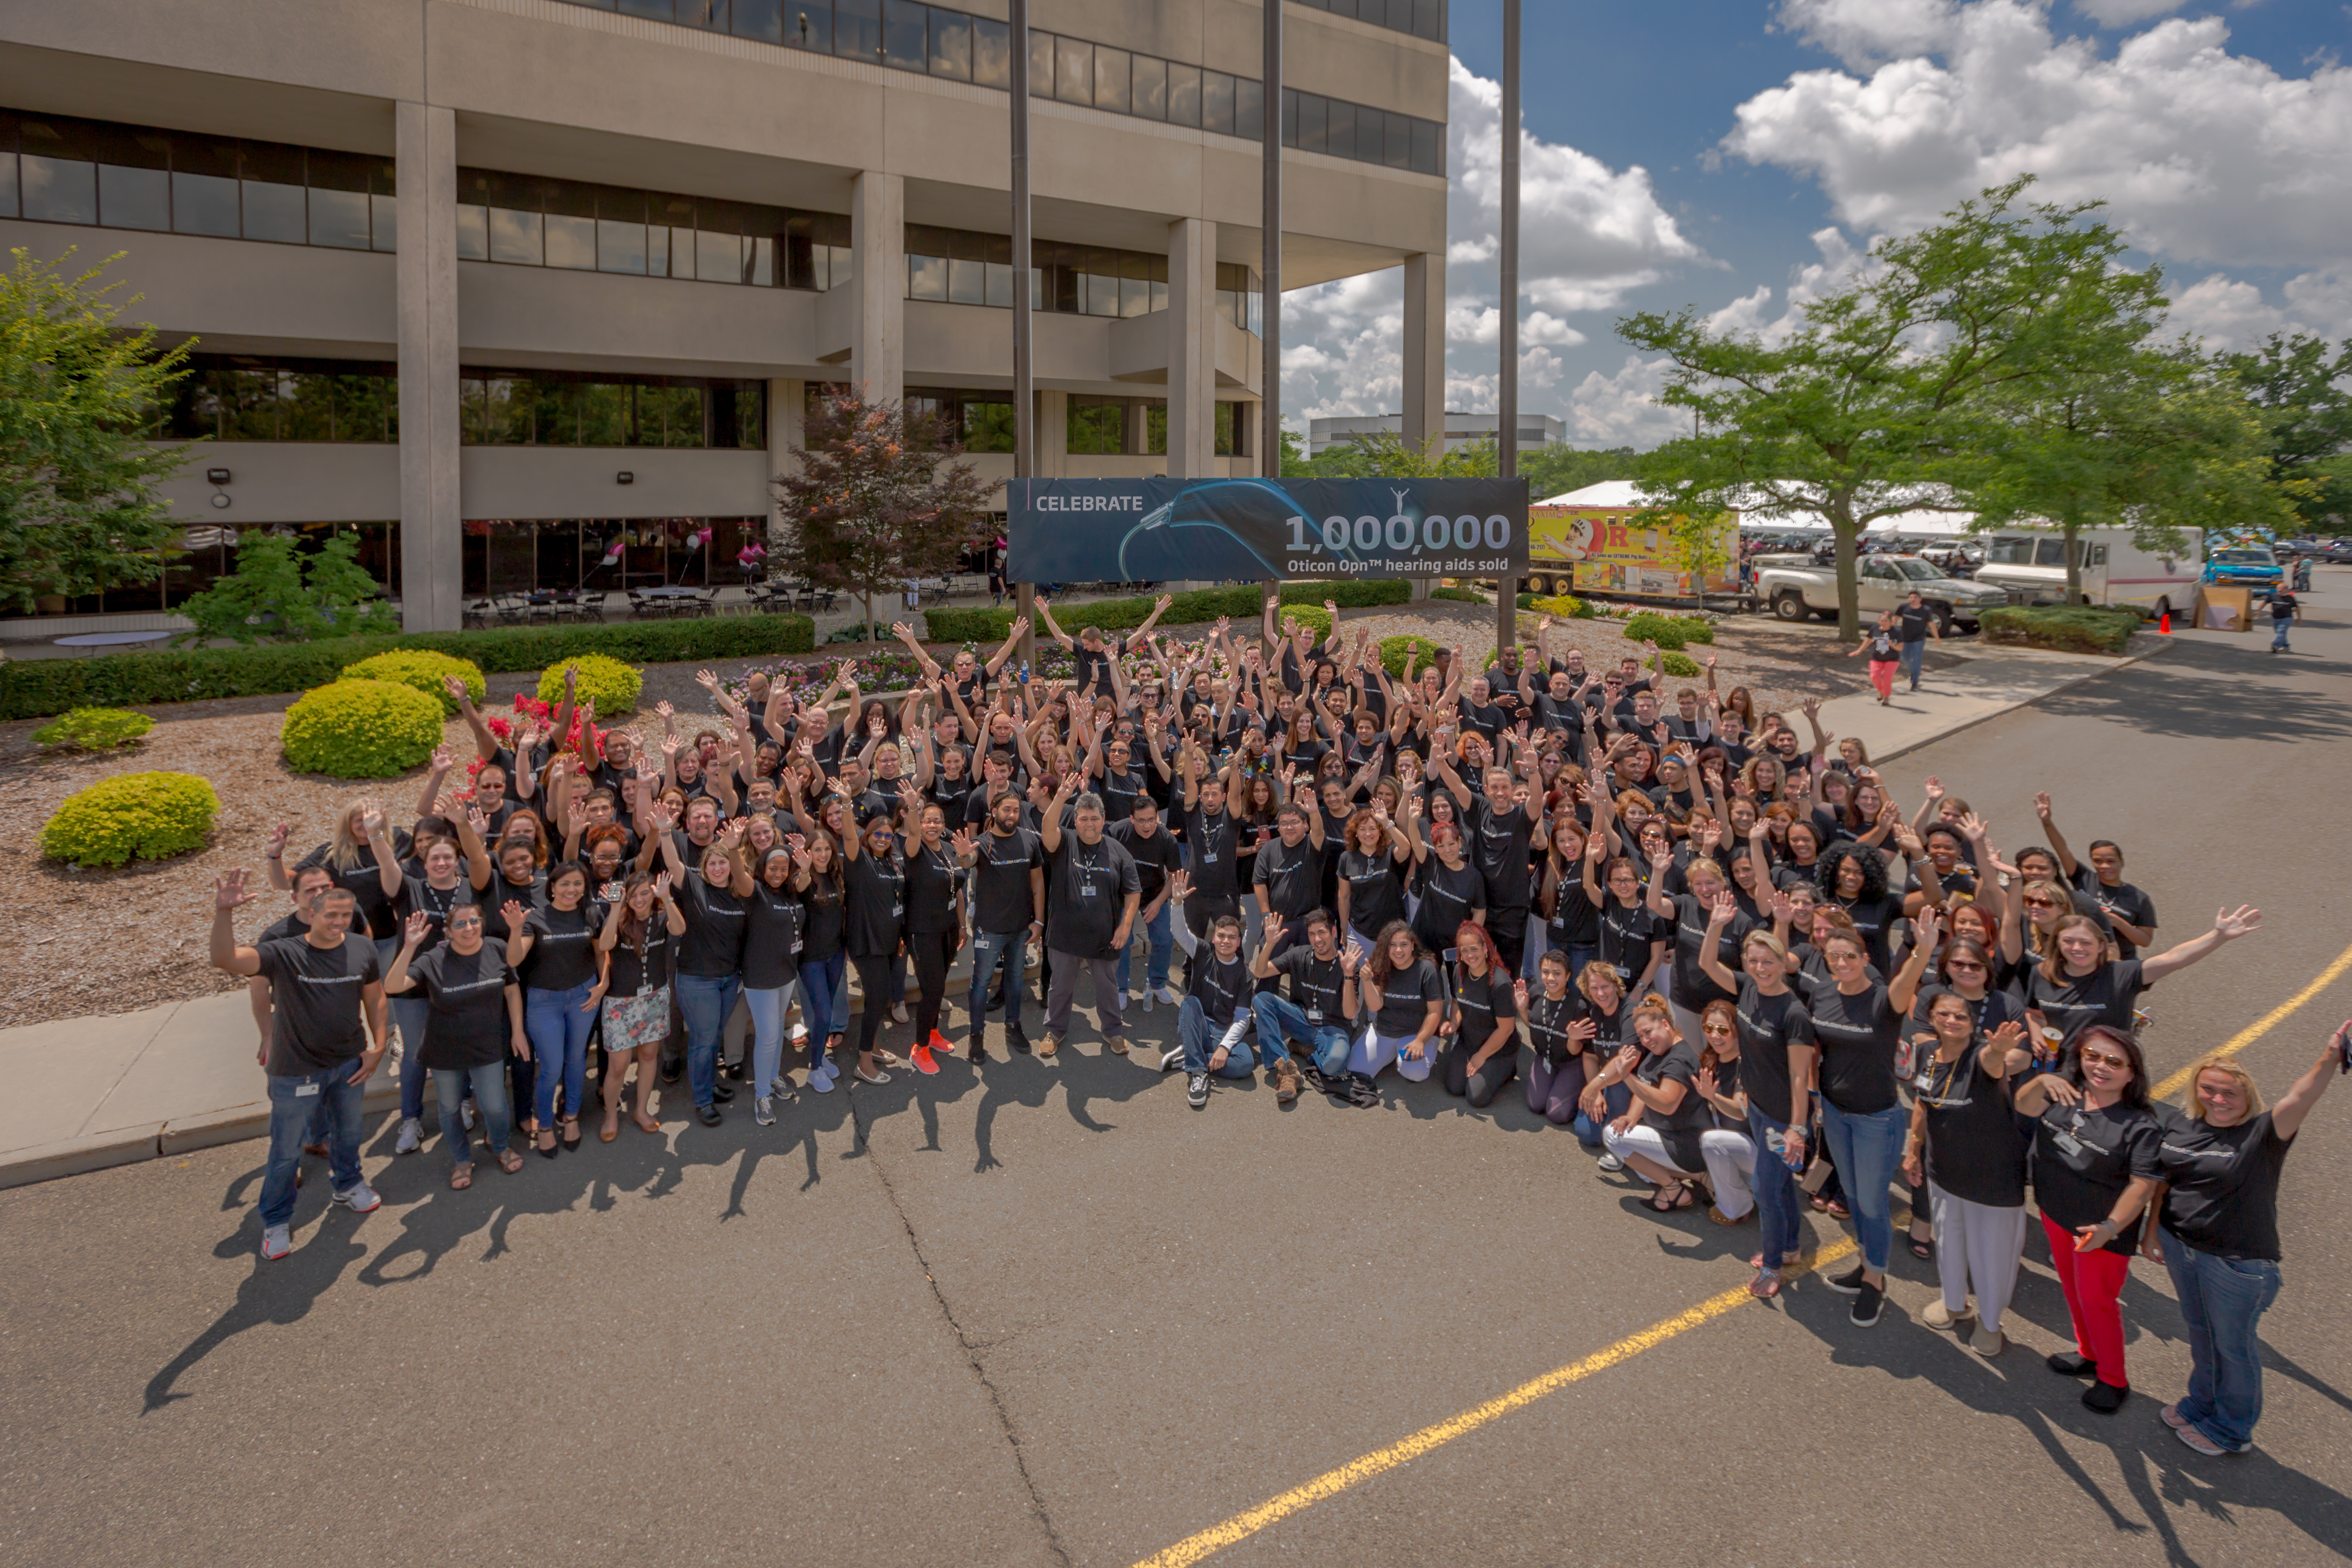 Oticon employees gathered at the US headquarters